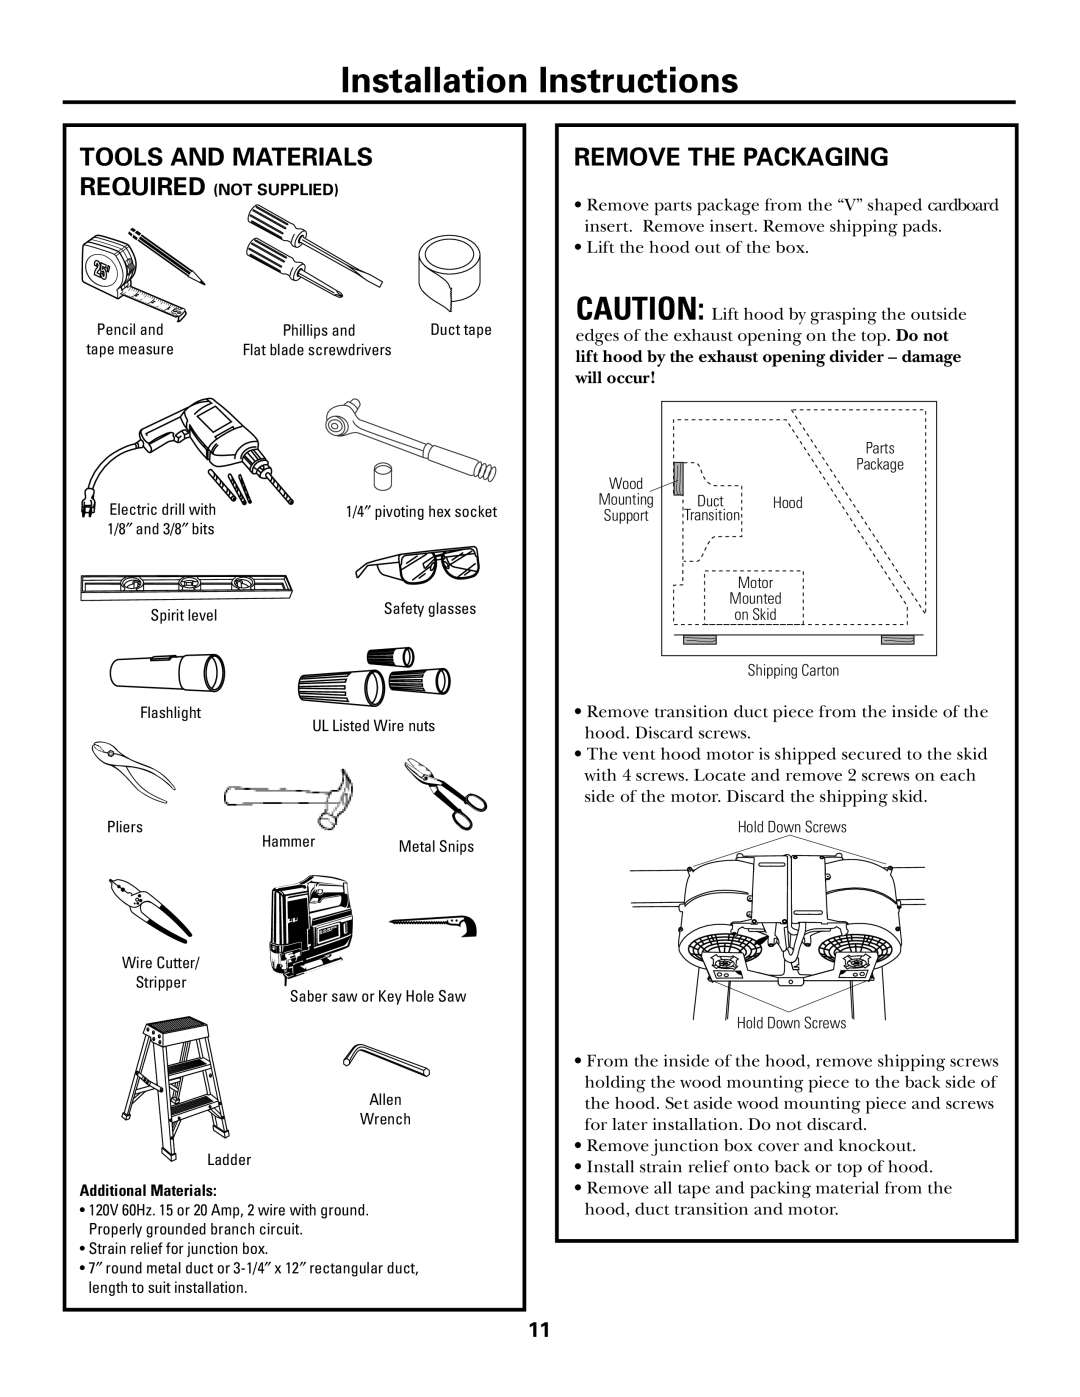 GE JV966, JV965, JV936 installation instructions Tools And Materials, Remove The Packaging, Installation Instructions 